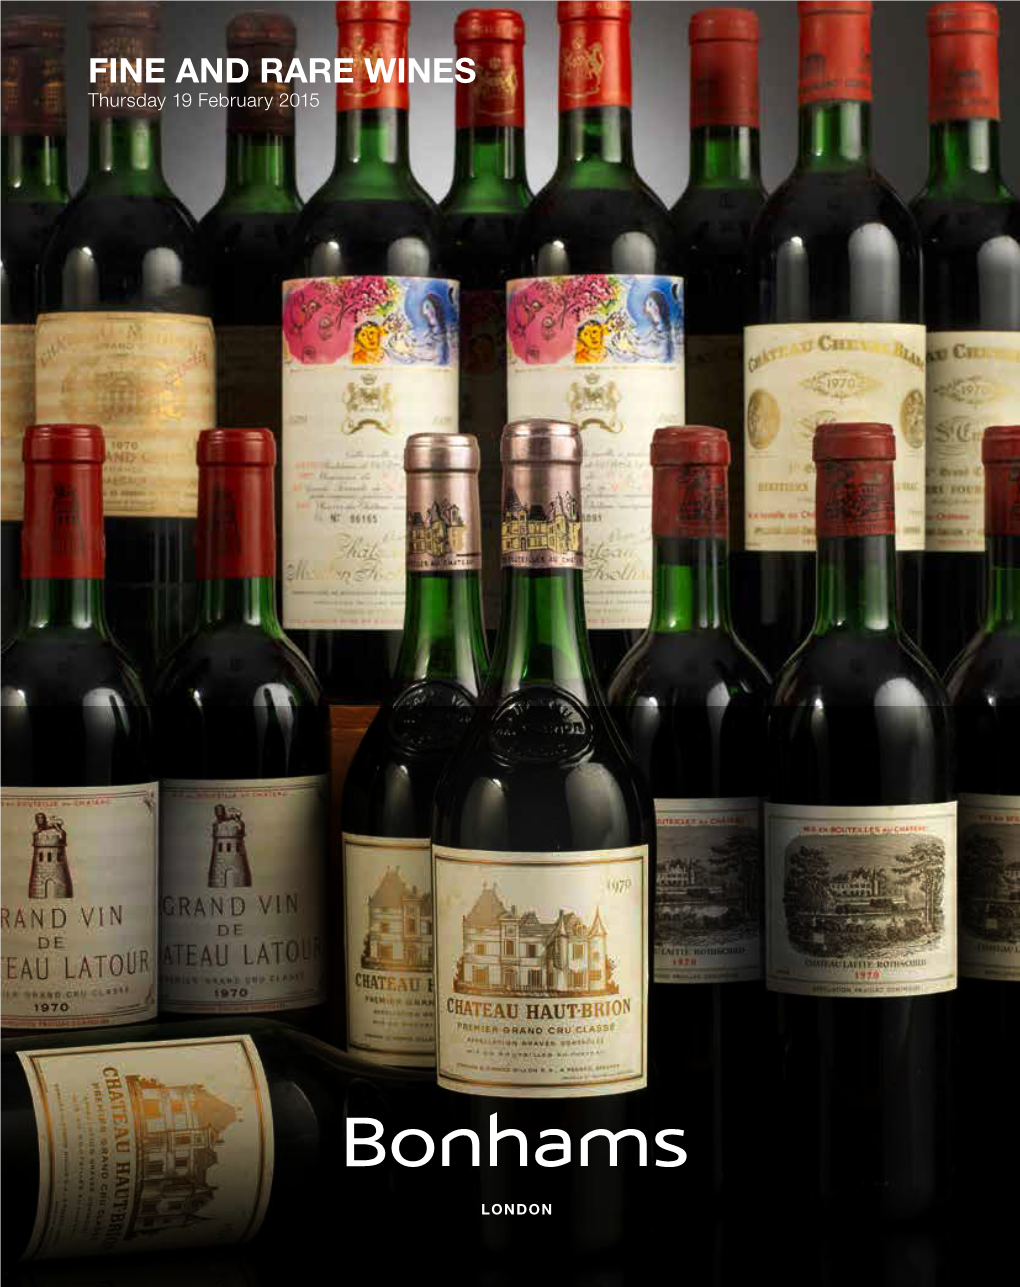 FINE and RARE WINES Thursday 19 February 2015 FINE and RARE WINES Thursday 19 February 2015 at 10.30Am and 2.30Pm 101 New Bond Street, London